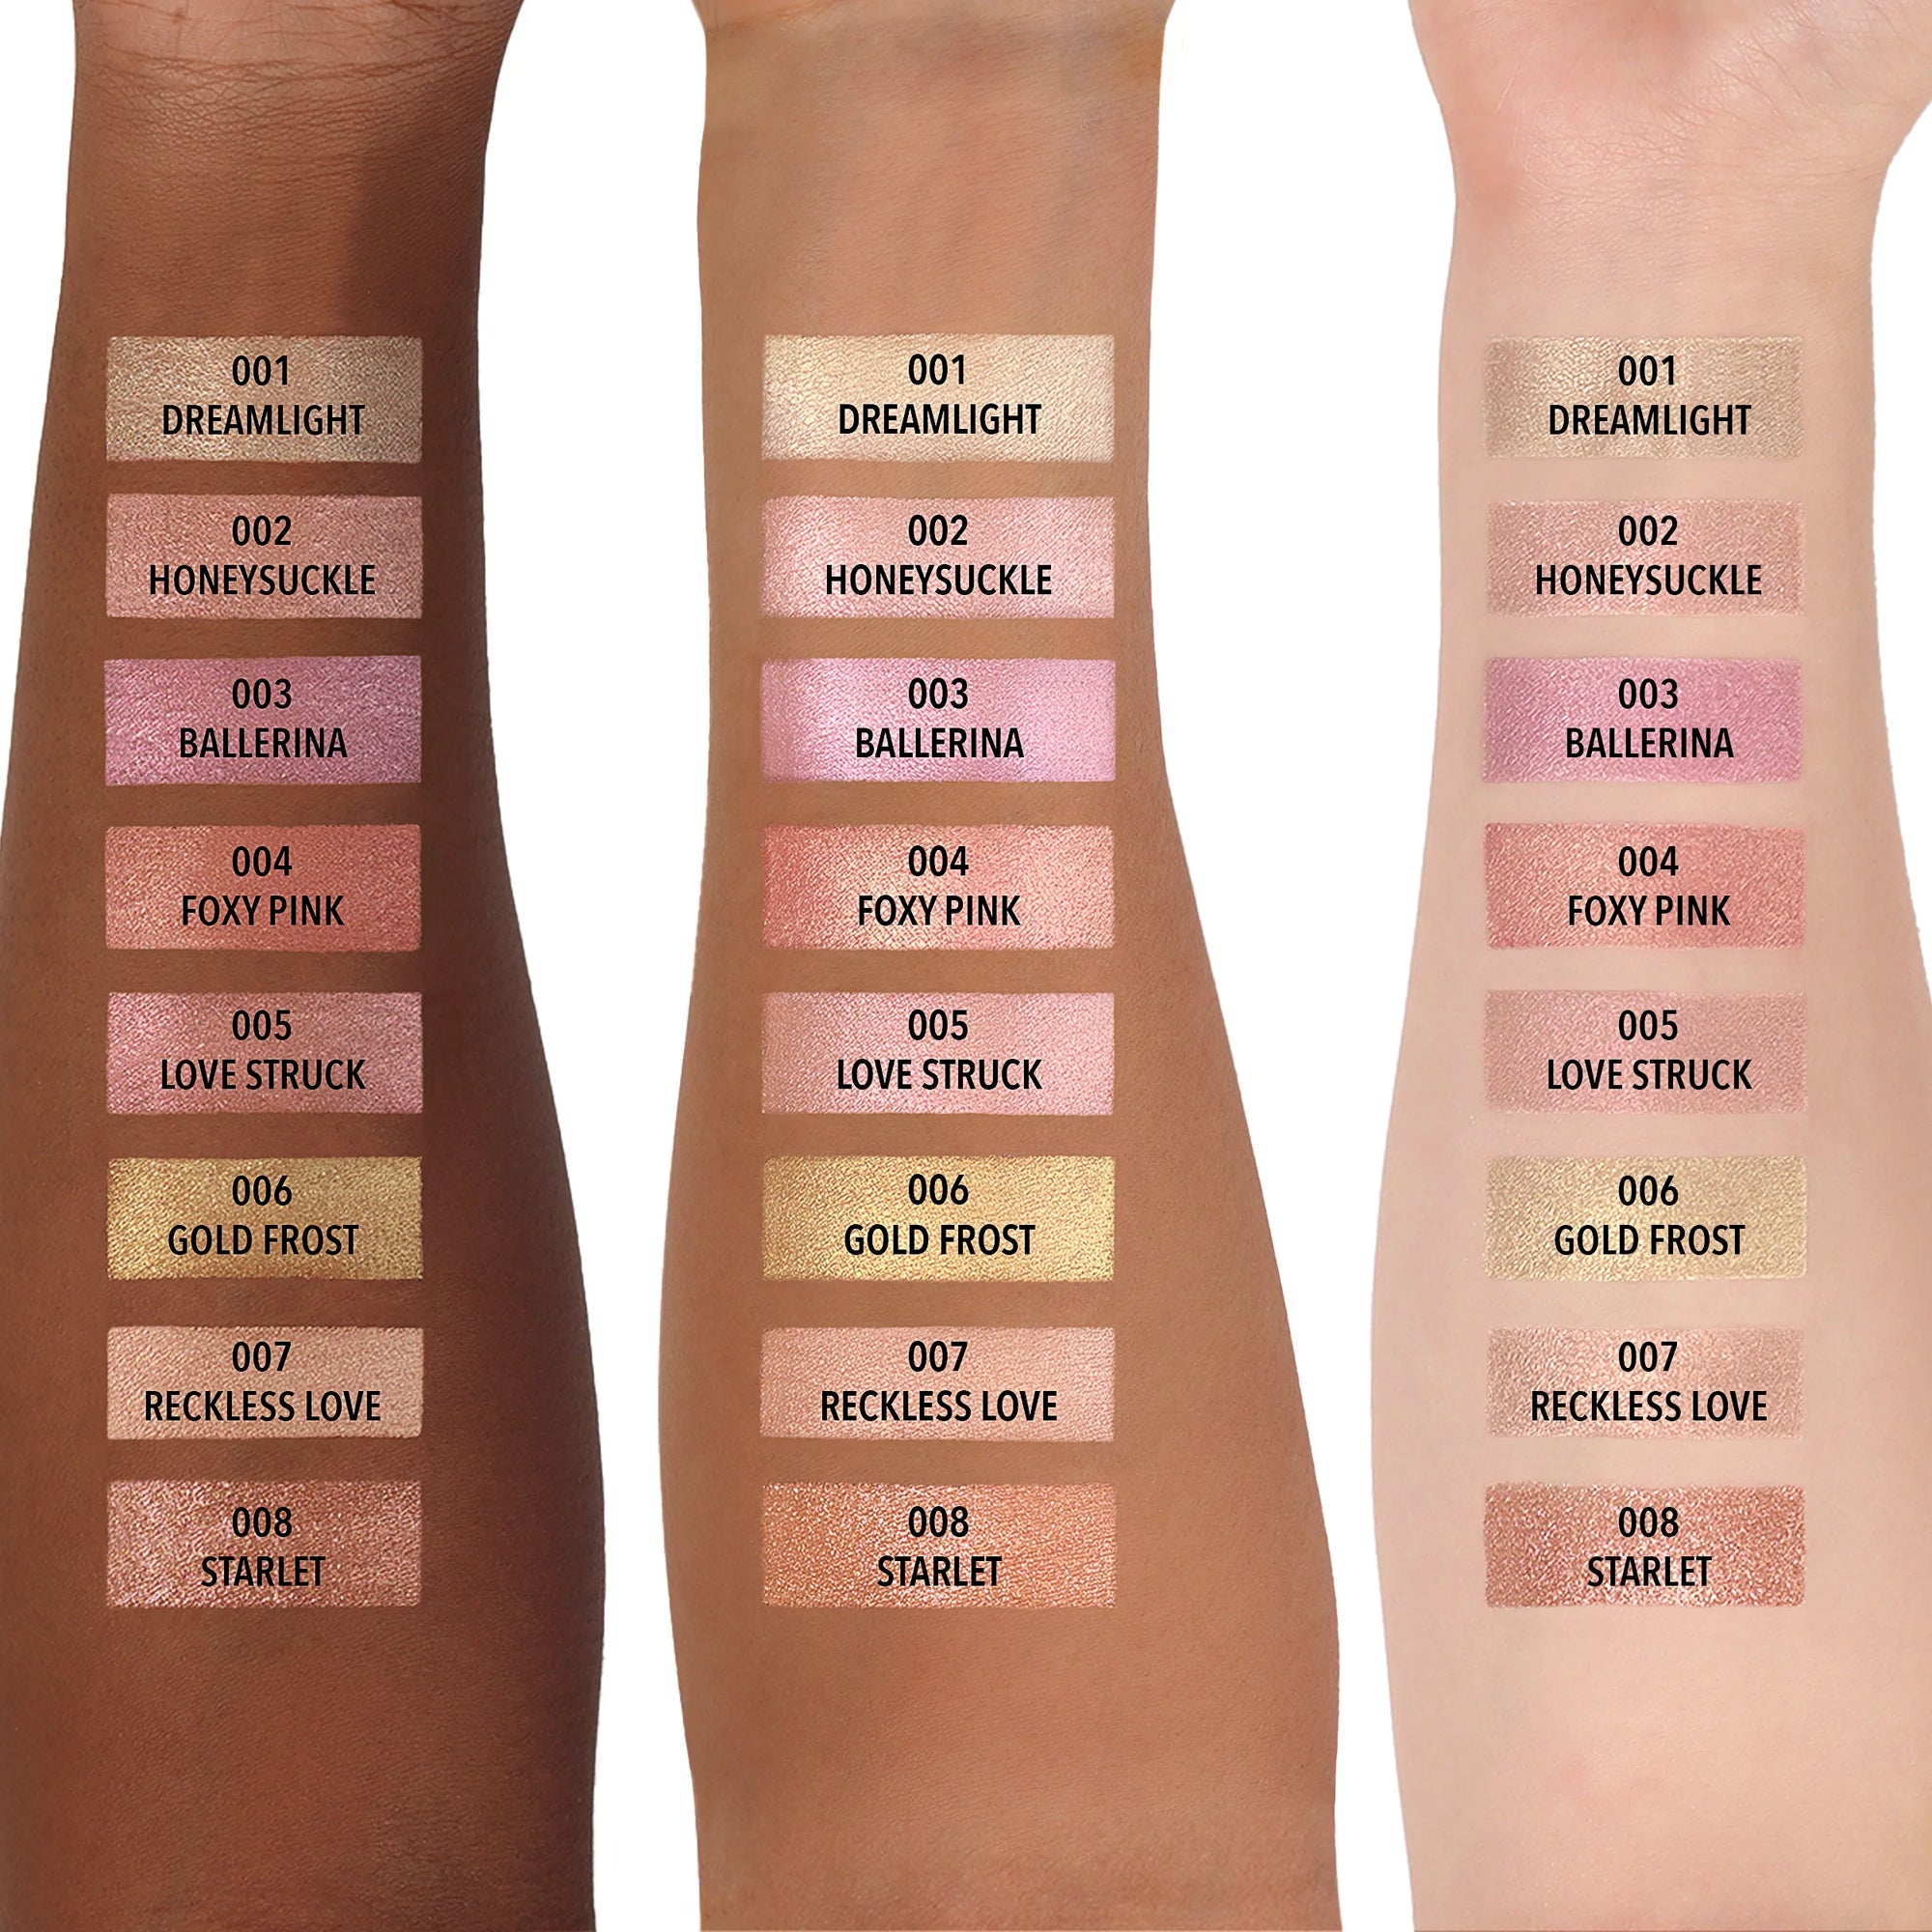 MOIRA COSMETICS DREAM LIGHT HIGHLIGHTER COLLECTION SWATCHES